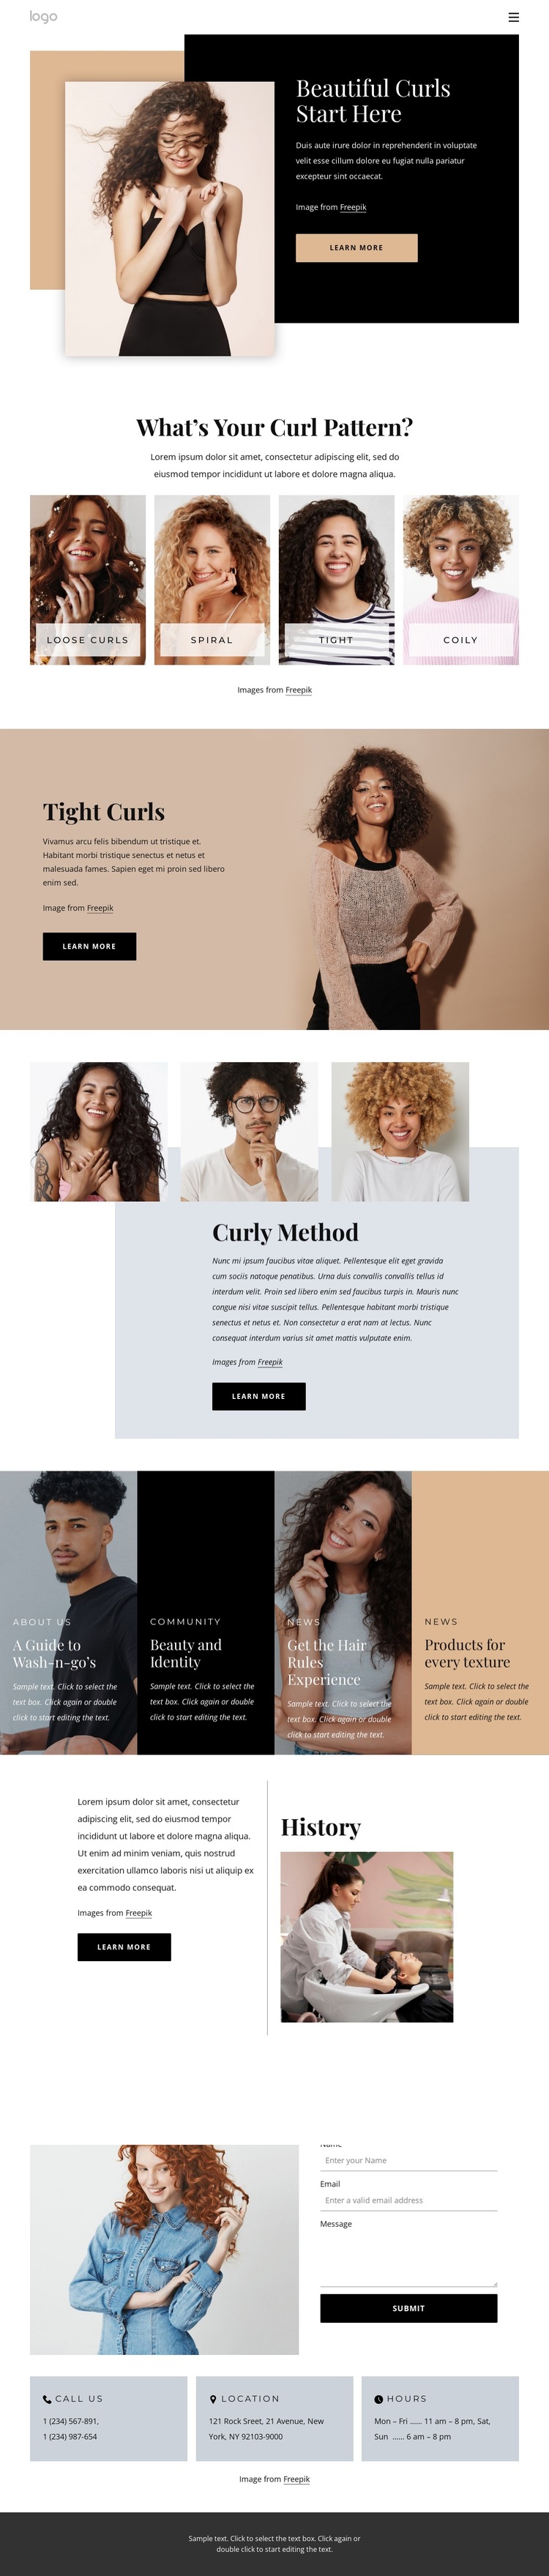 Bring out the best in your curls HTML5 Template